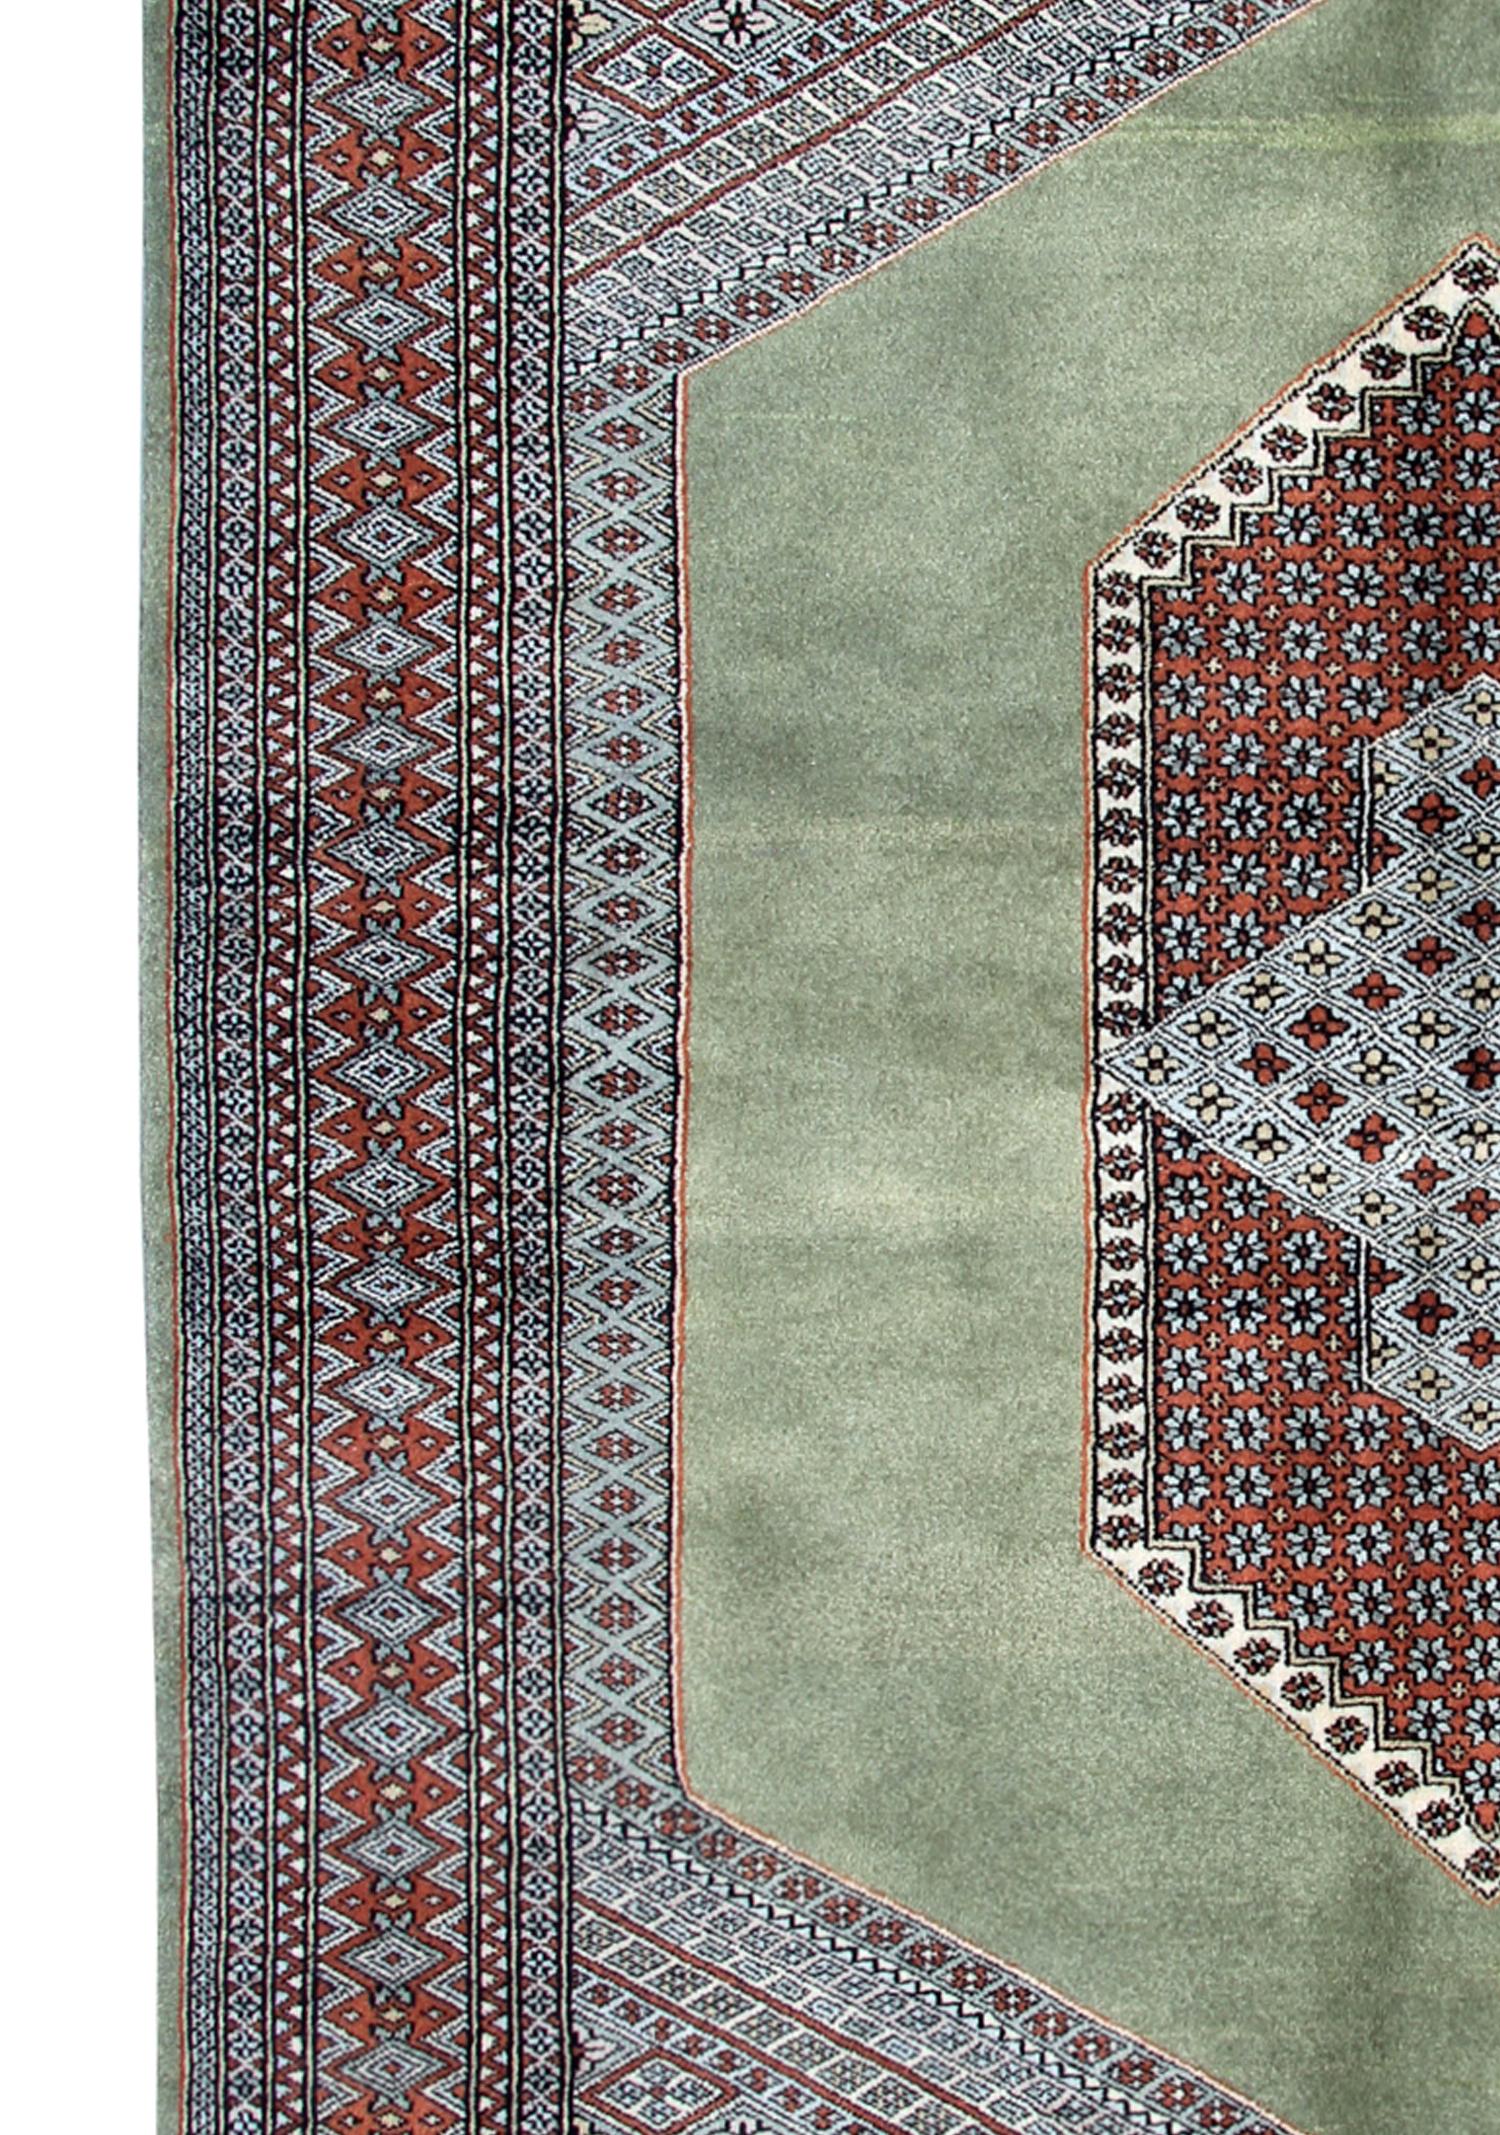 Late 20th Century Vintage Rug Green Turkmen Bukhara, Hand-Knotted Wool Carpet